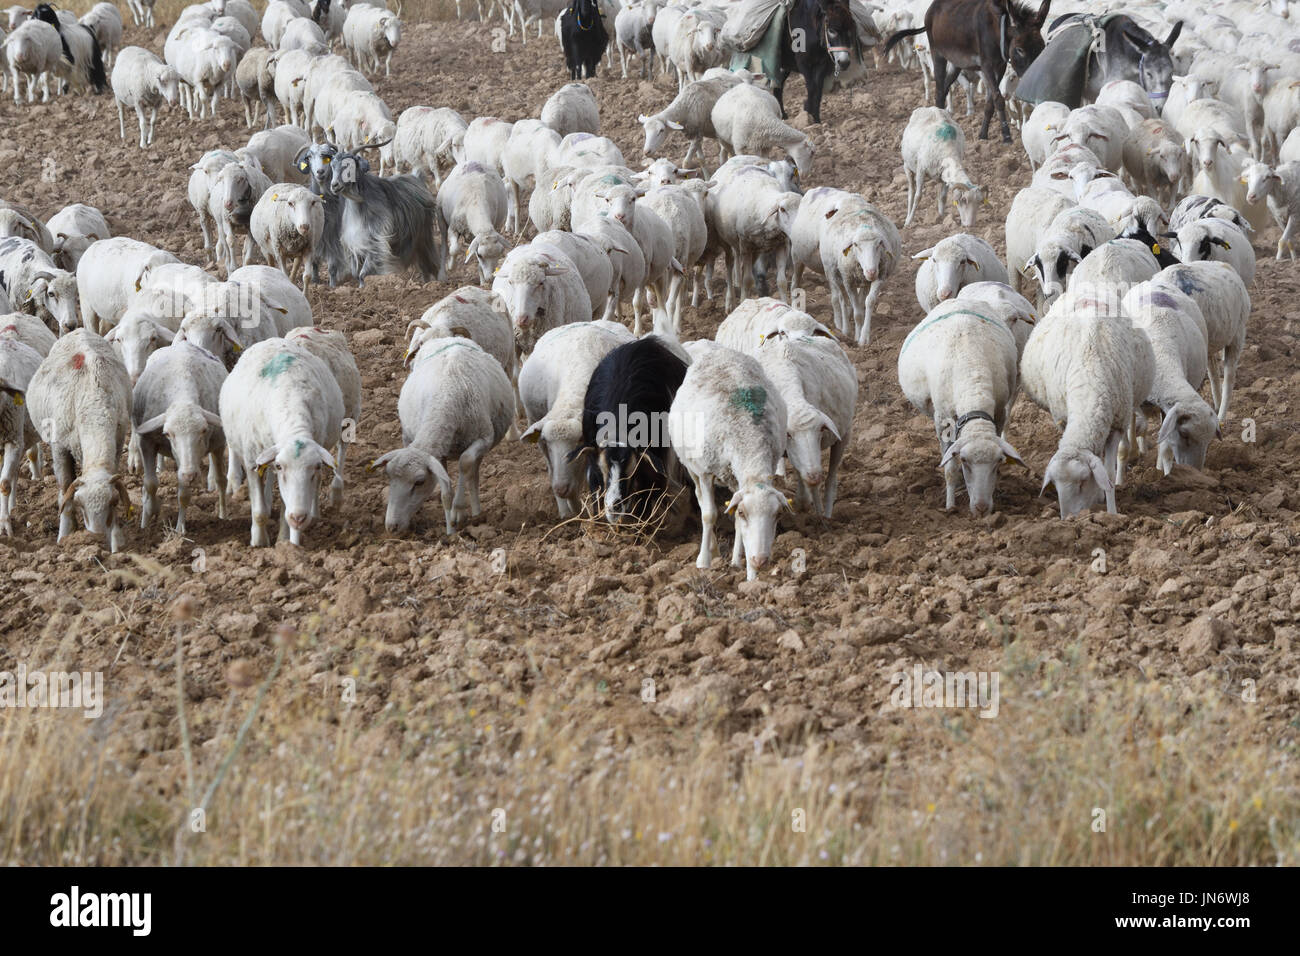 flock of sheep and goats being herded to home Stock Photo